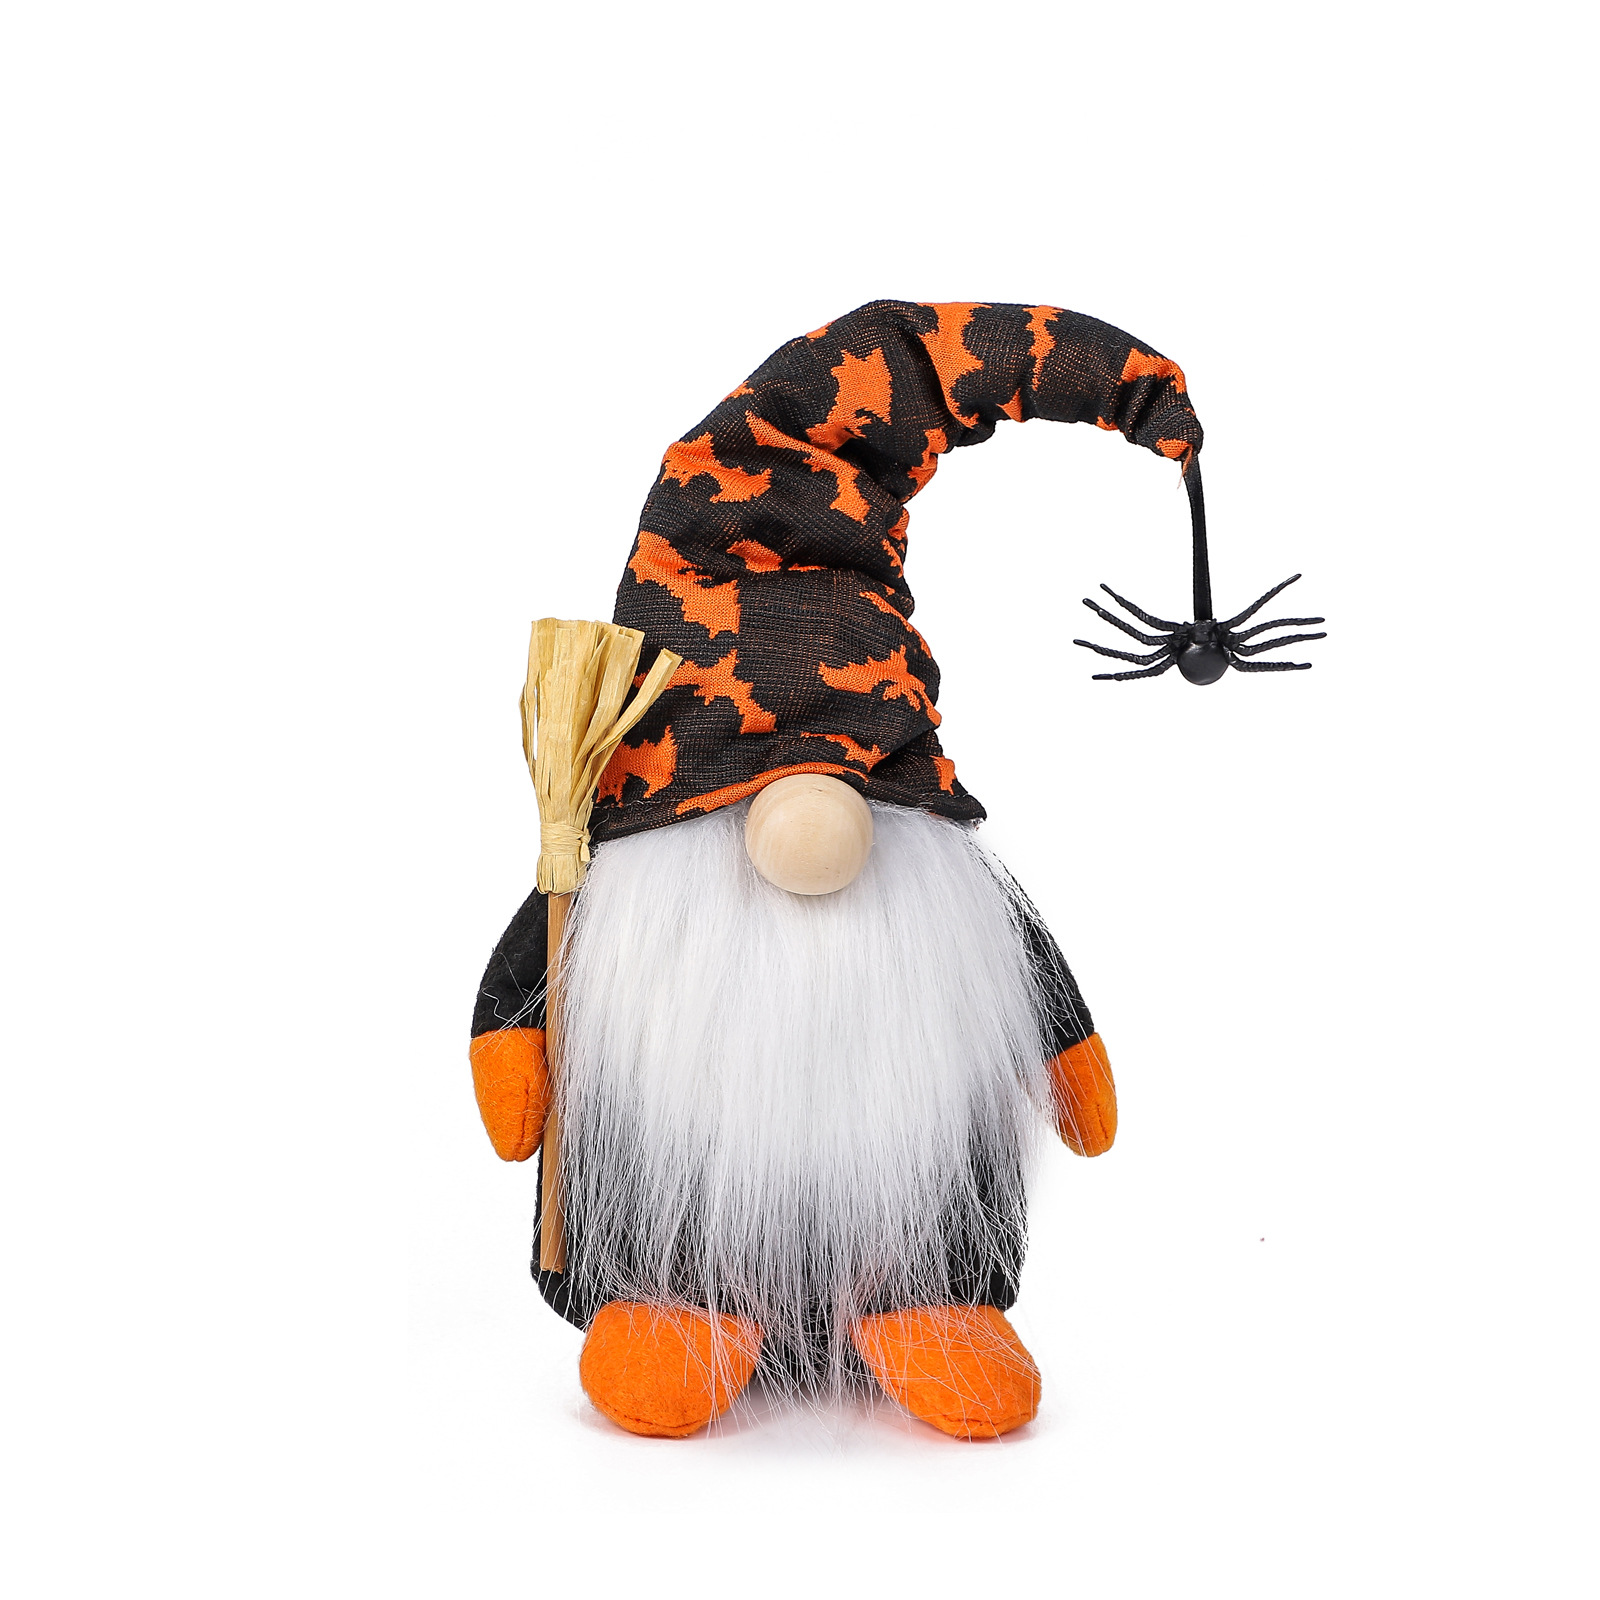 New Halloween Toys Halloween Decorations Faceless Gnome Doll Spider Bat Party Atmosphere Props C66